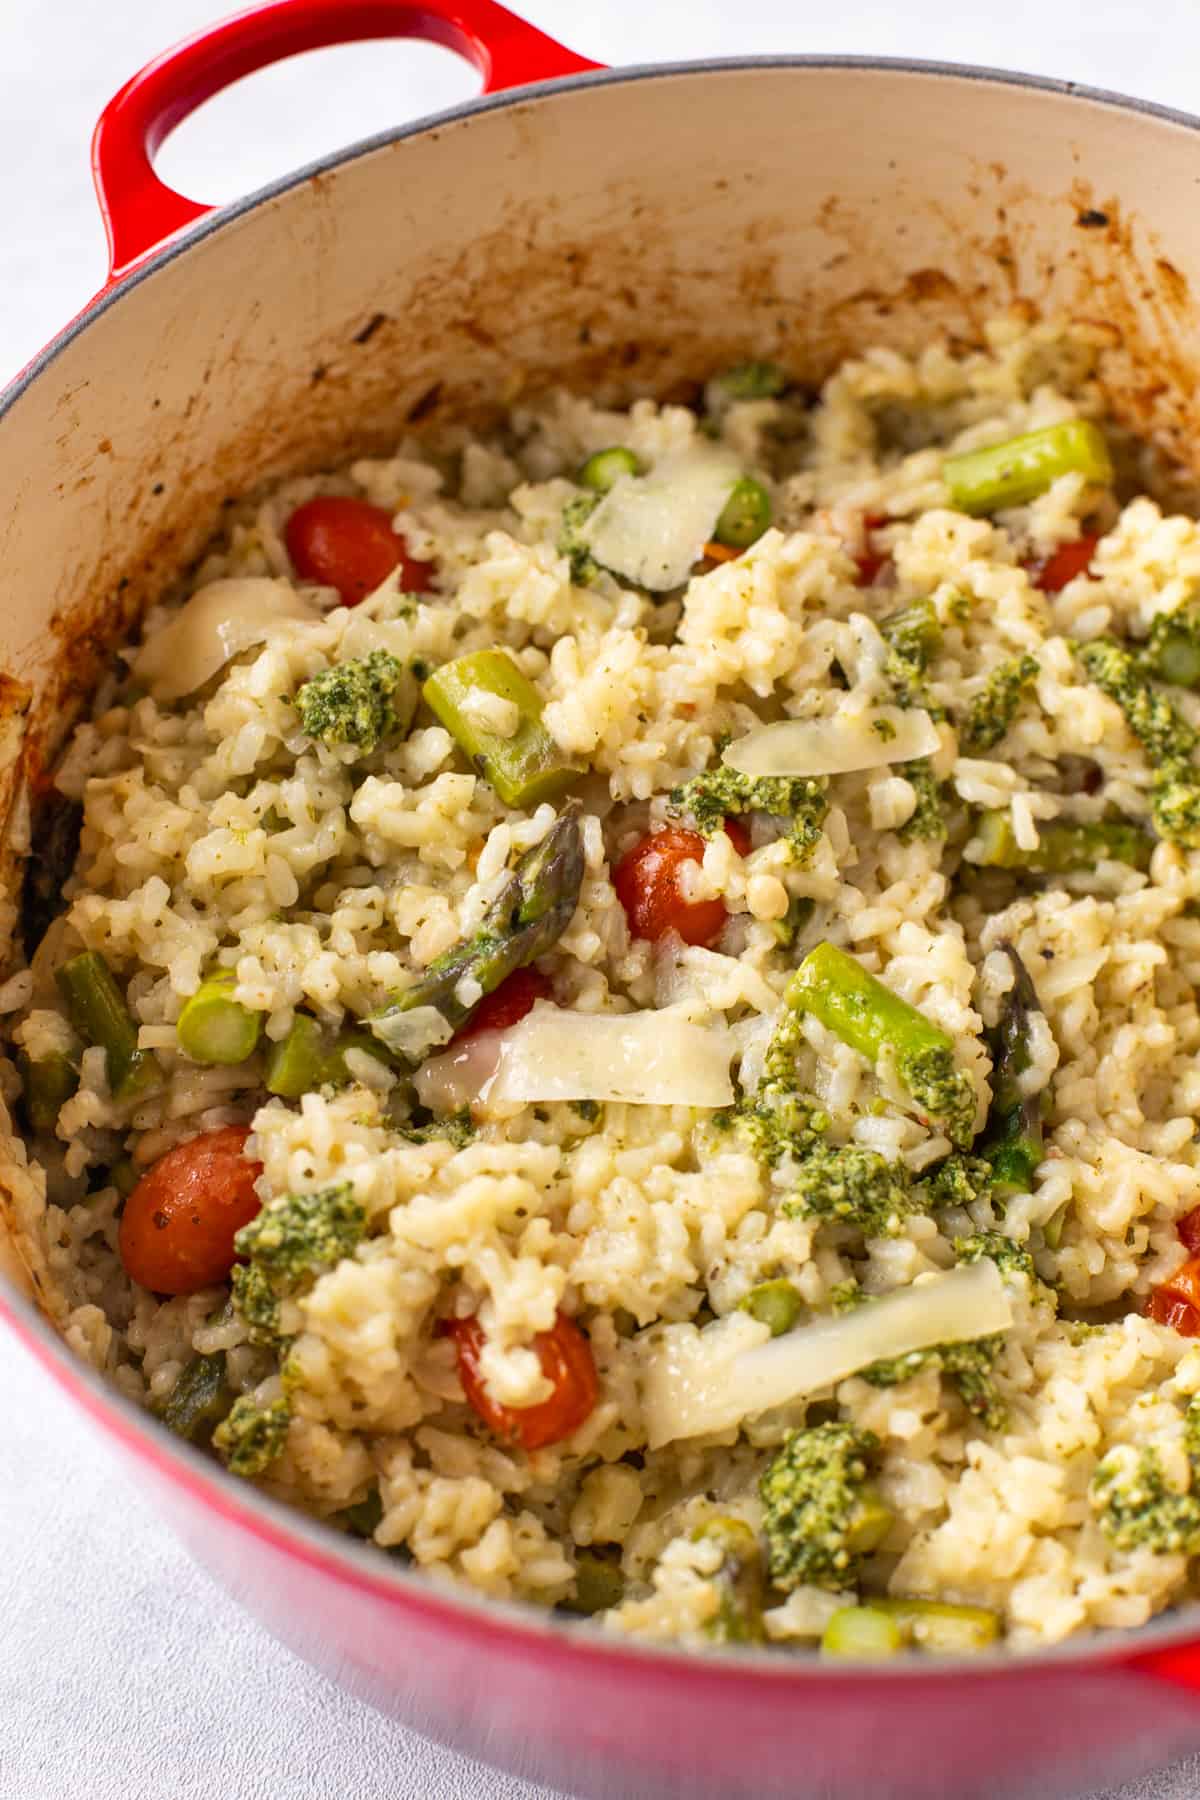 A panful of baked risotto with asparagus and tomatoes.